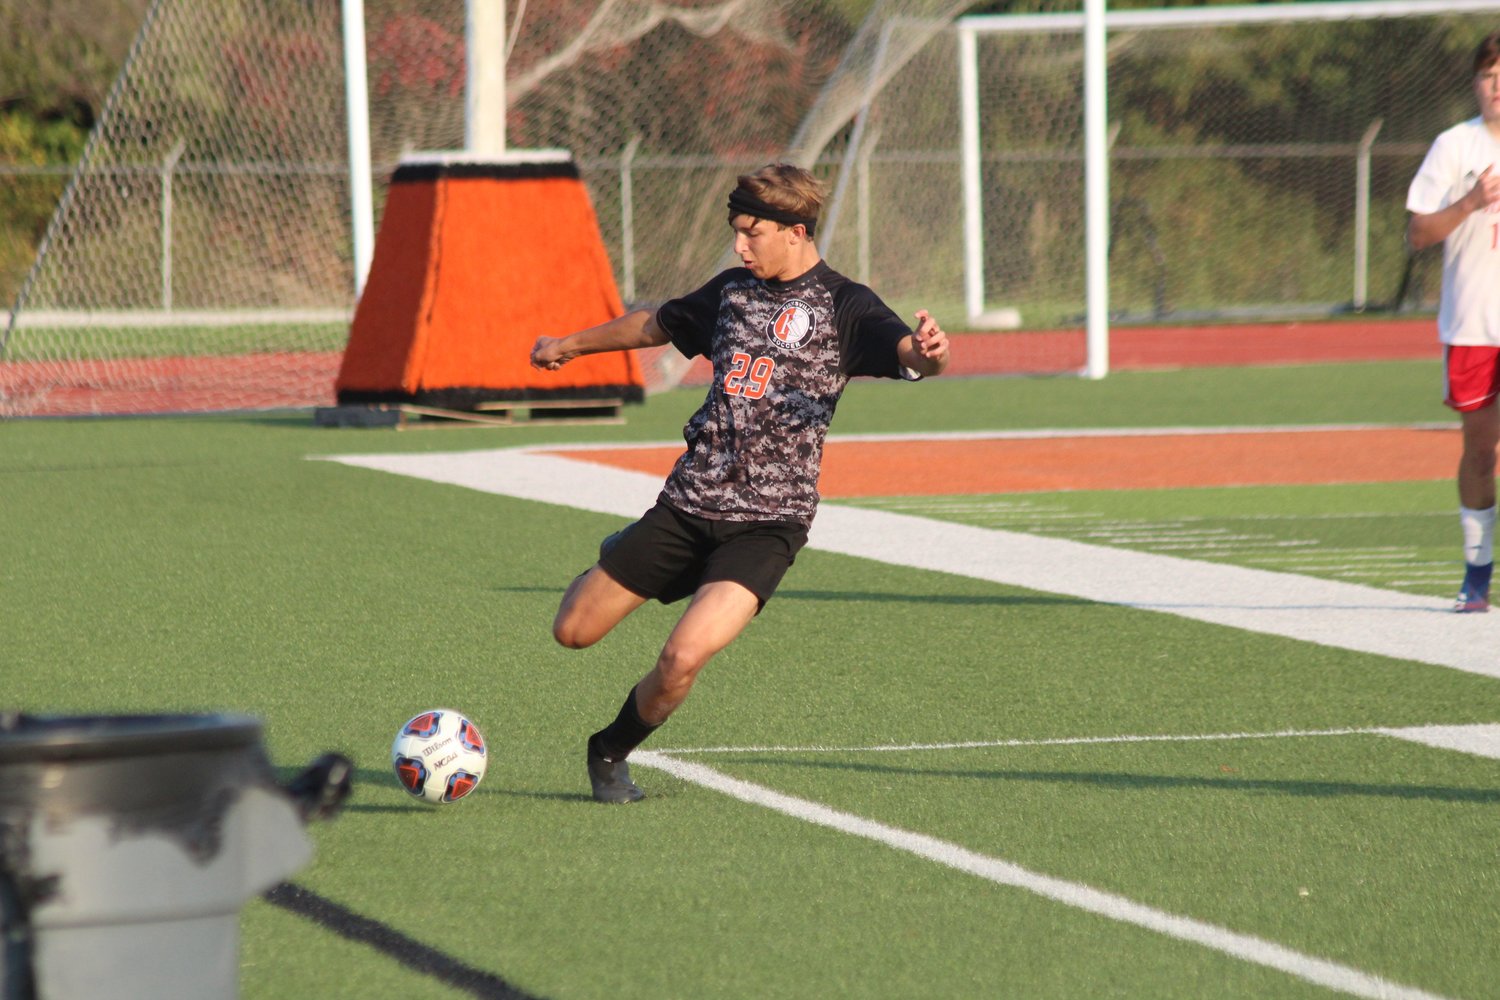 Action from Thursday's soccer game between Kirksville and Moberly.